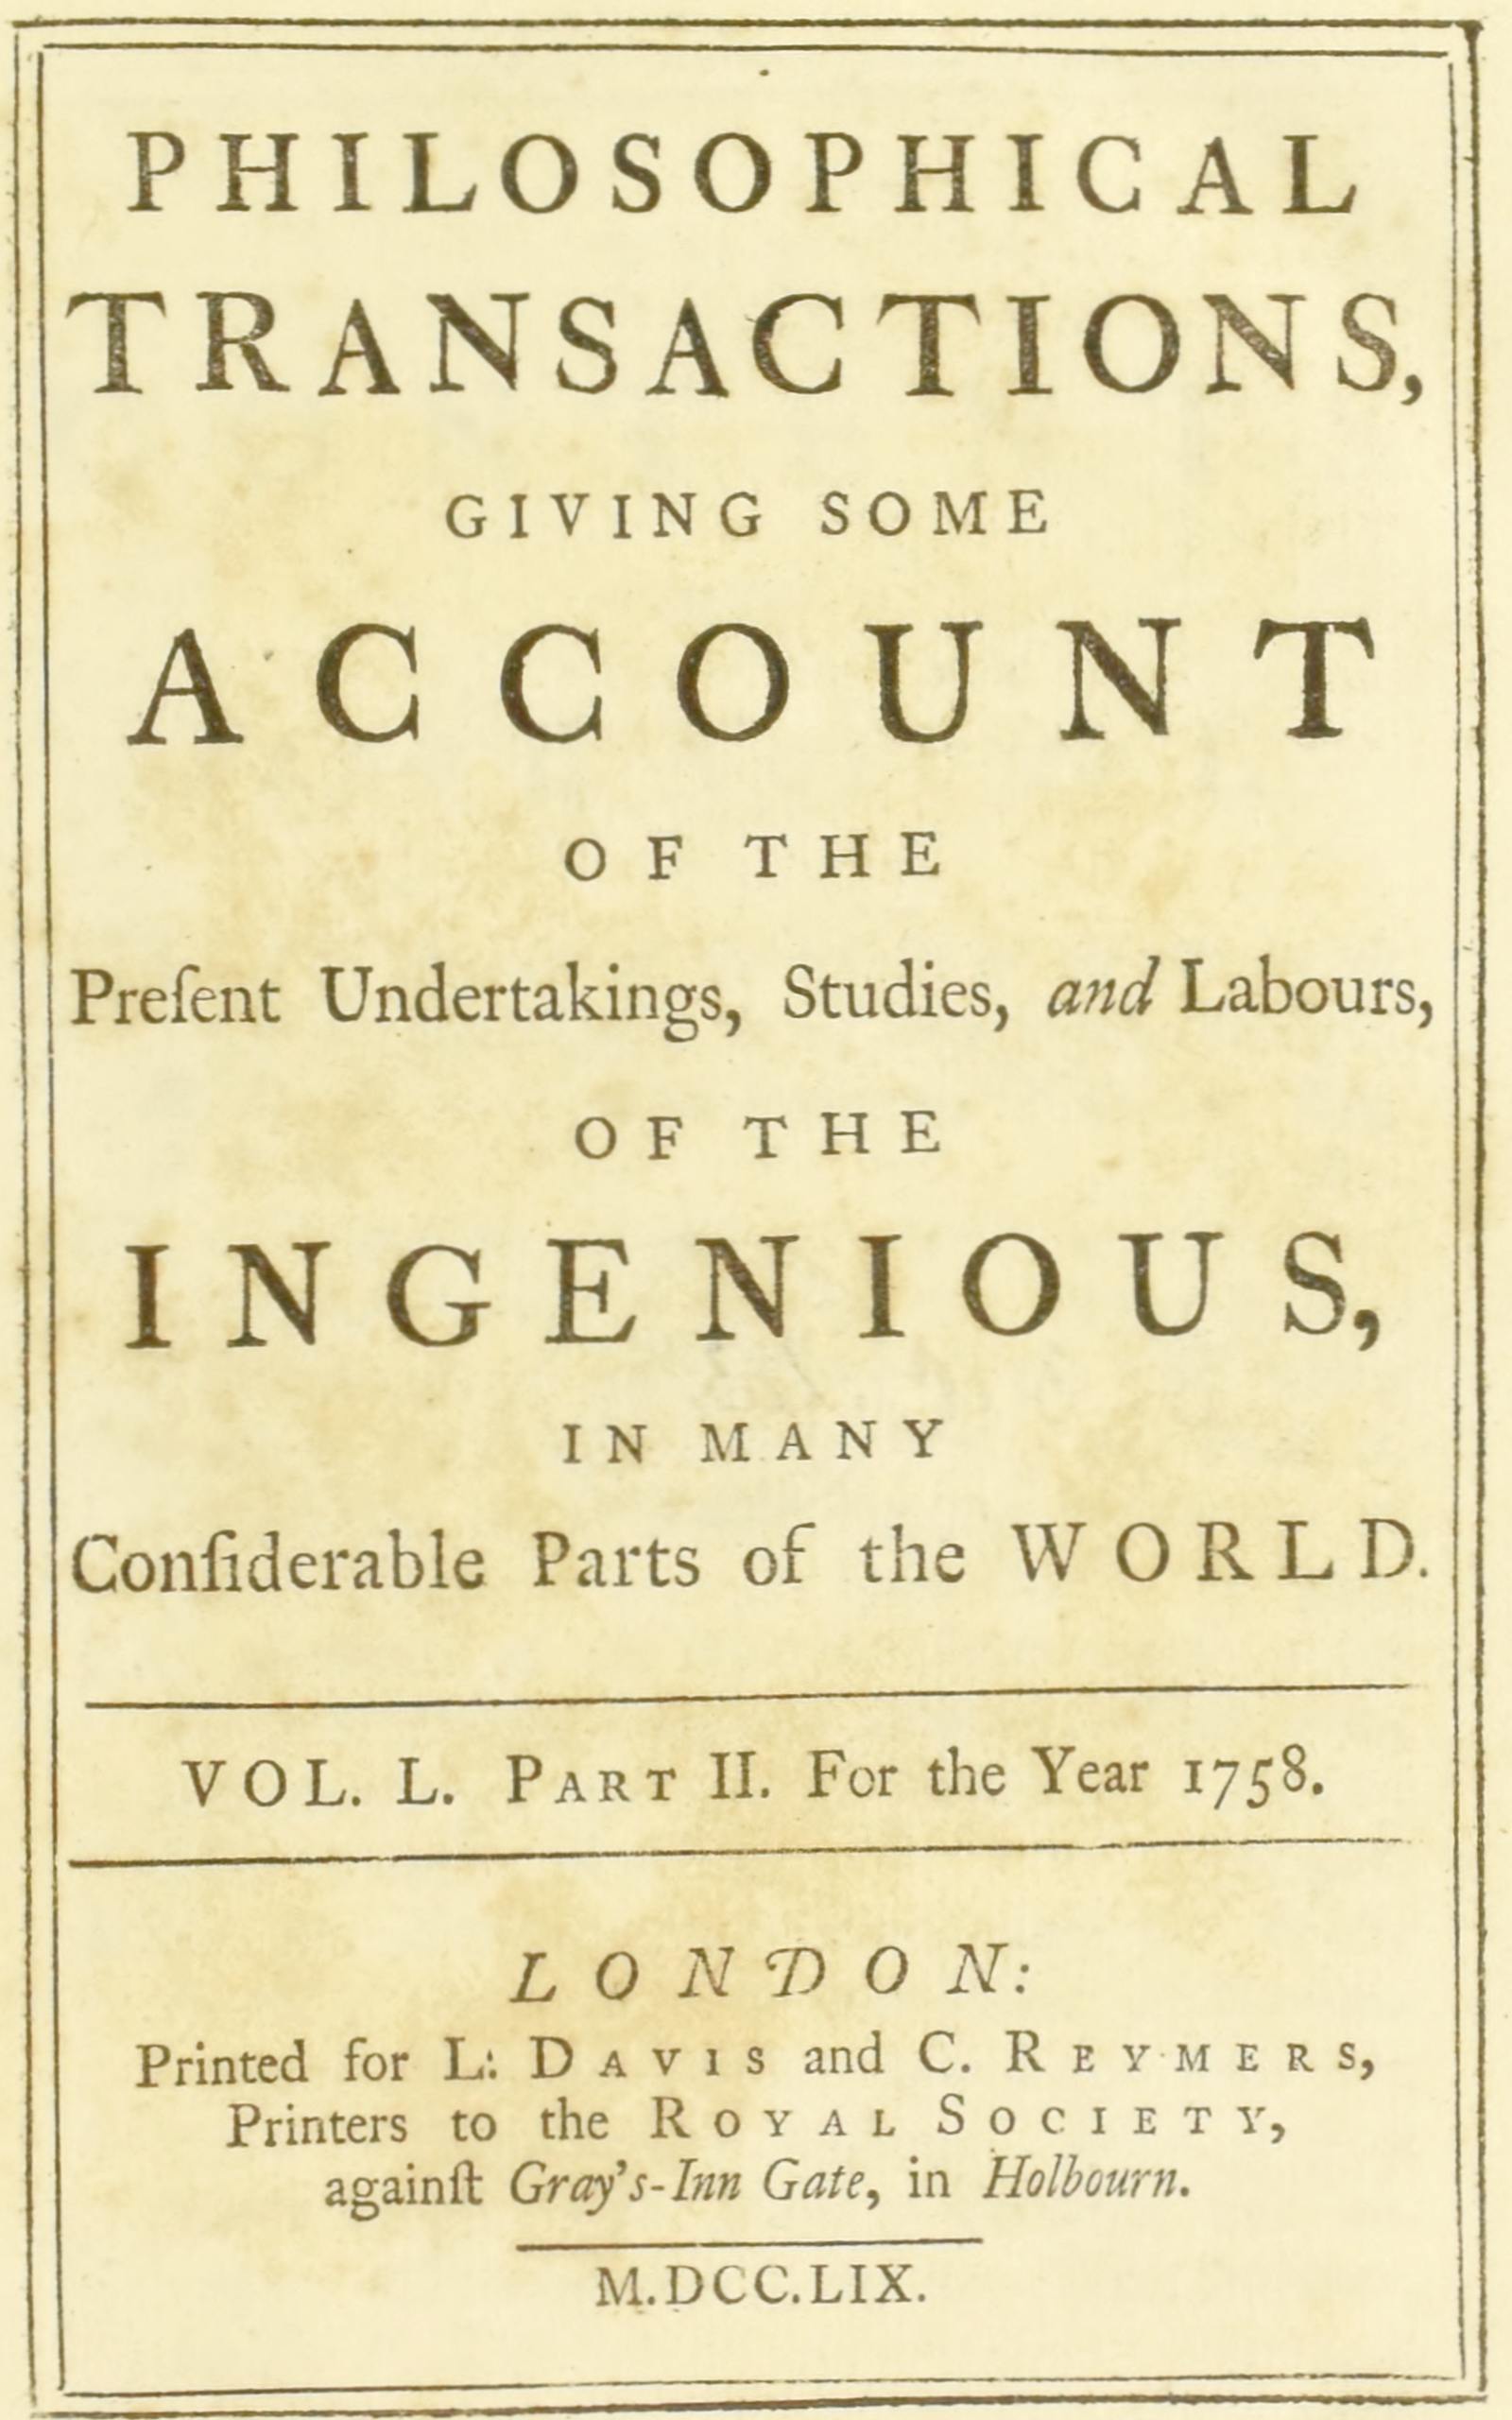 Philosophical Transactions Of The Royal Society Vol L Part 2 1758 Giving Some Account Of The Present Undertakings Studies And Labours Of The Ingenious In Many Considerable Parts Of The World By